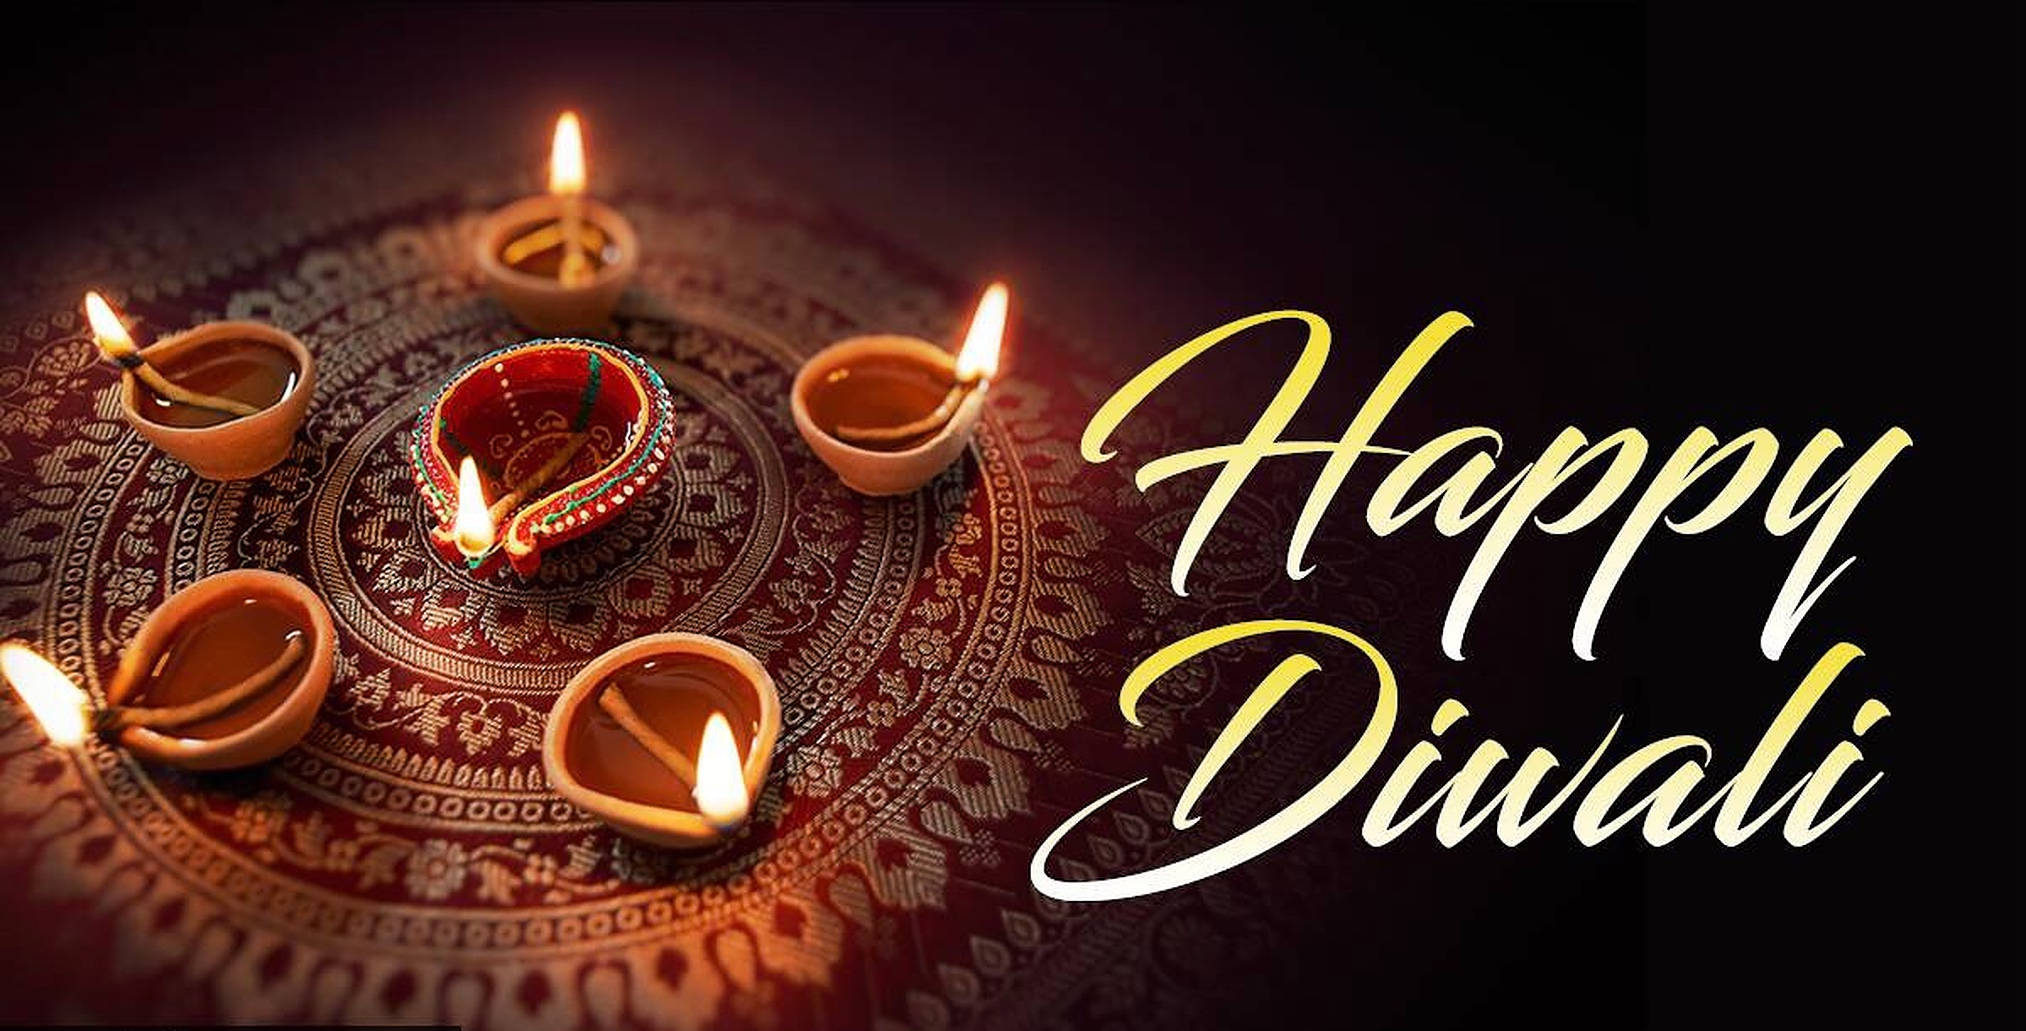 Beautiful Poster Of A Diya On The Left Side Of An Image With Red Background With Orbs Designs And Golden Text, 